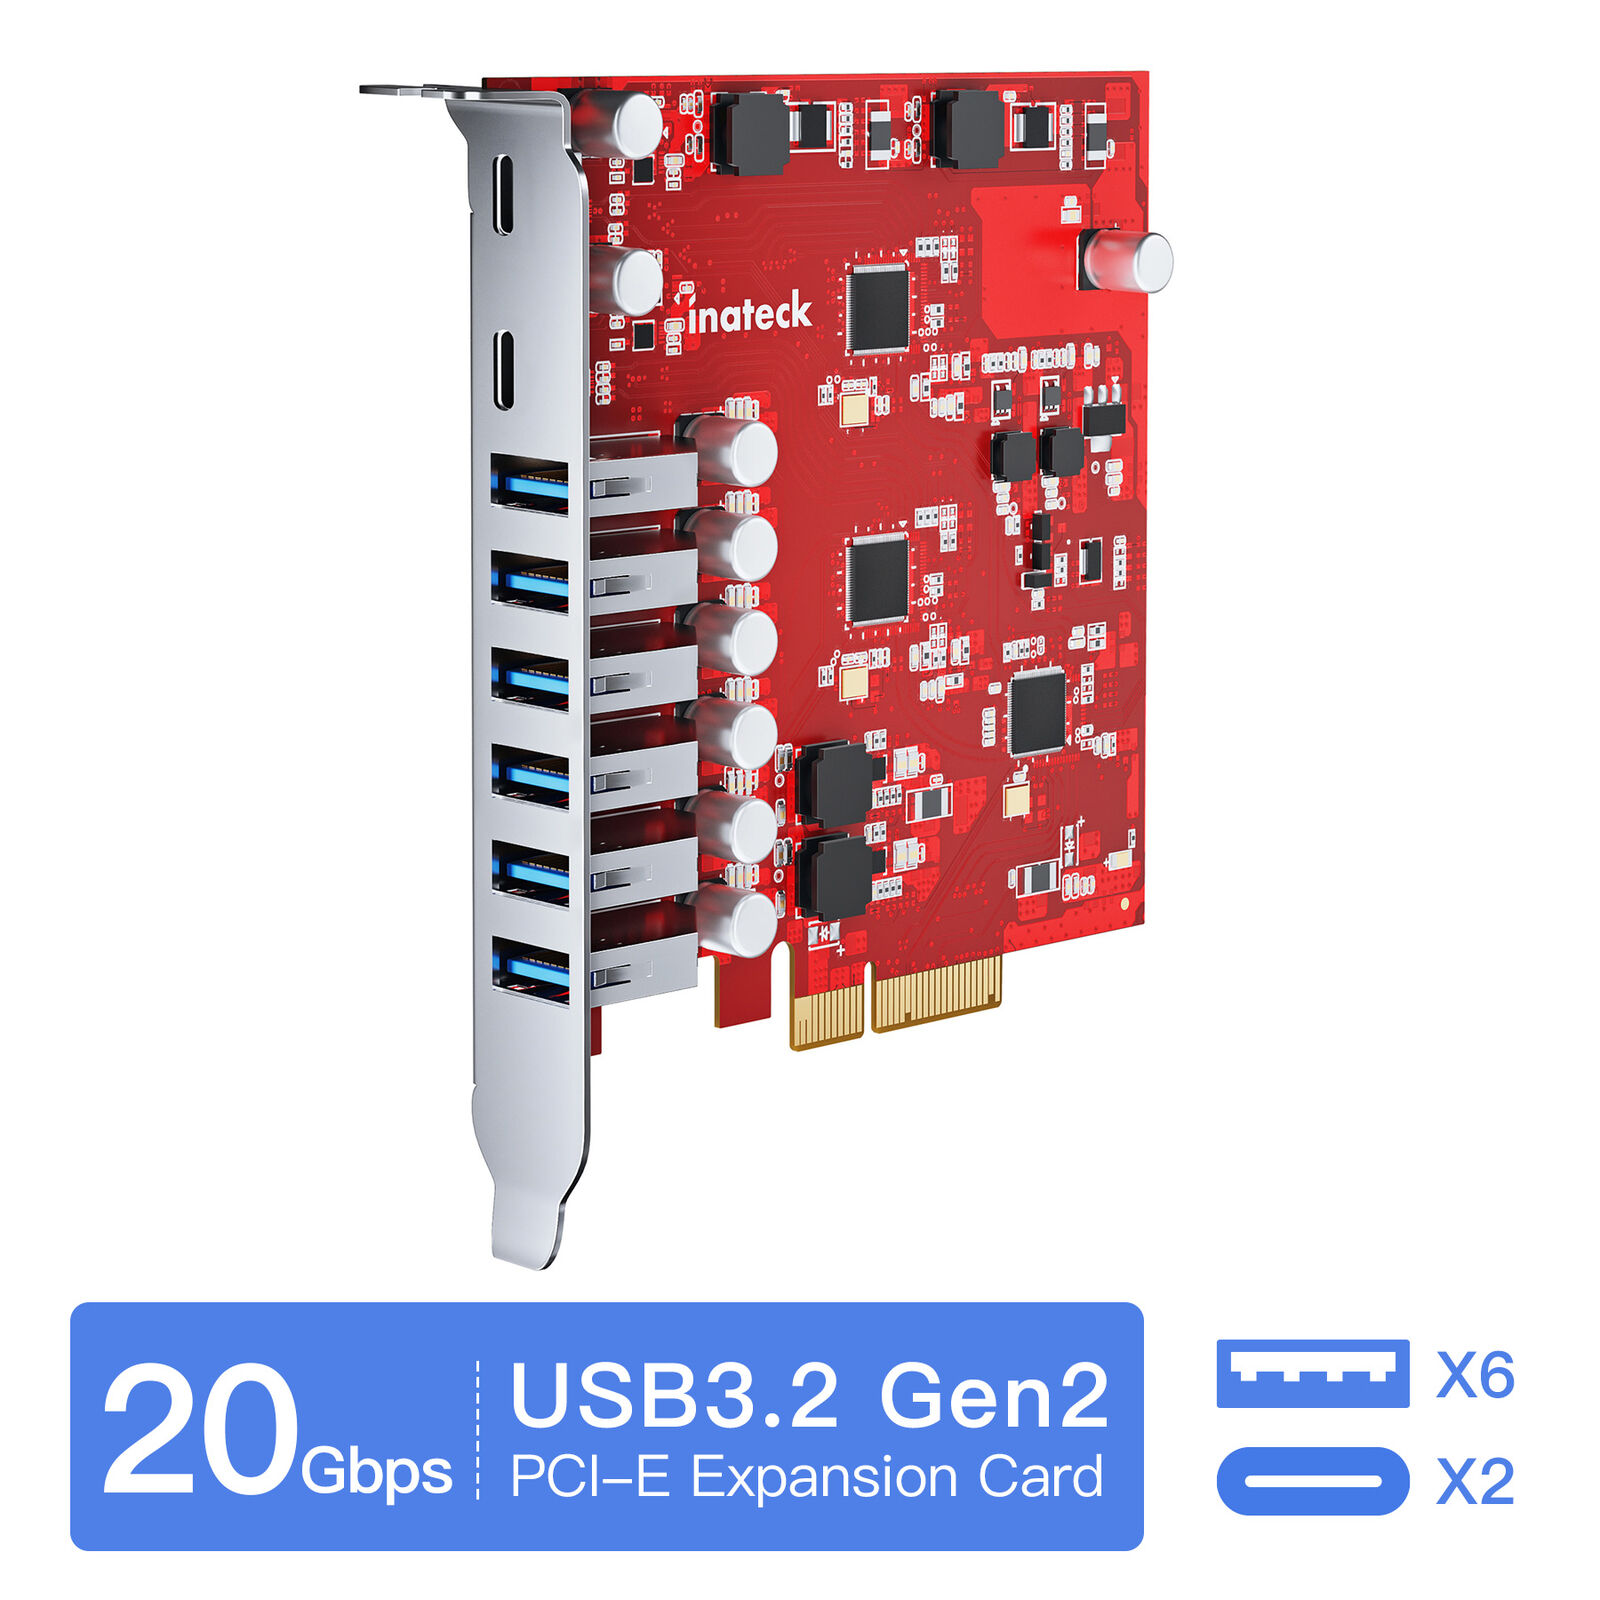 Inateck PCIe to USB 3.2 Gen 2 Expansion Card 20Gbps w/ 6 USB A & 2 USB C Ports